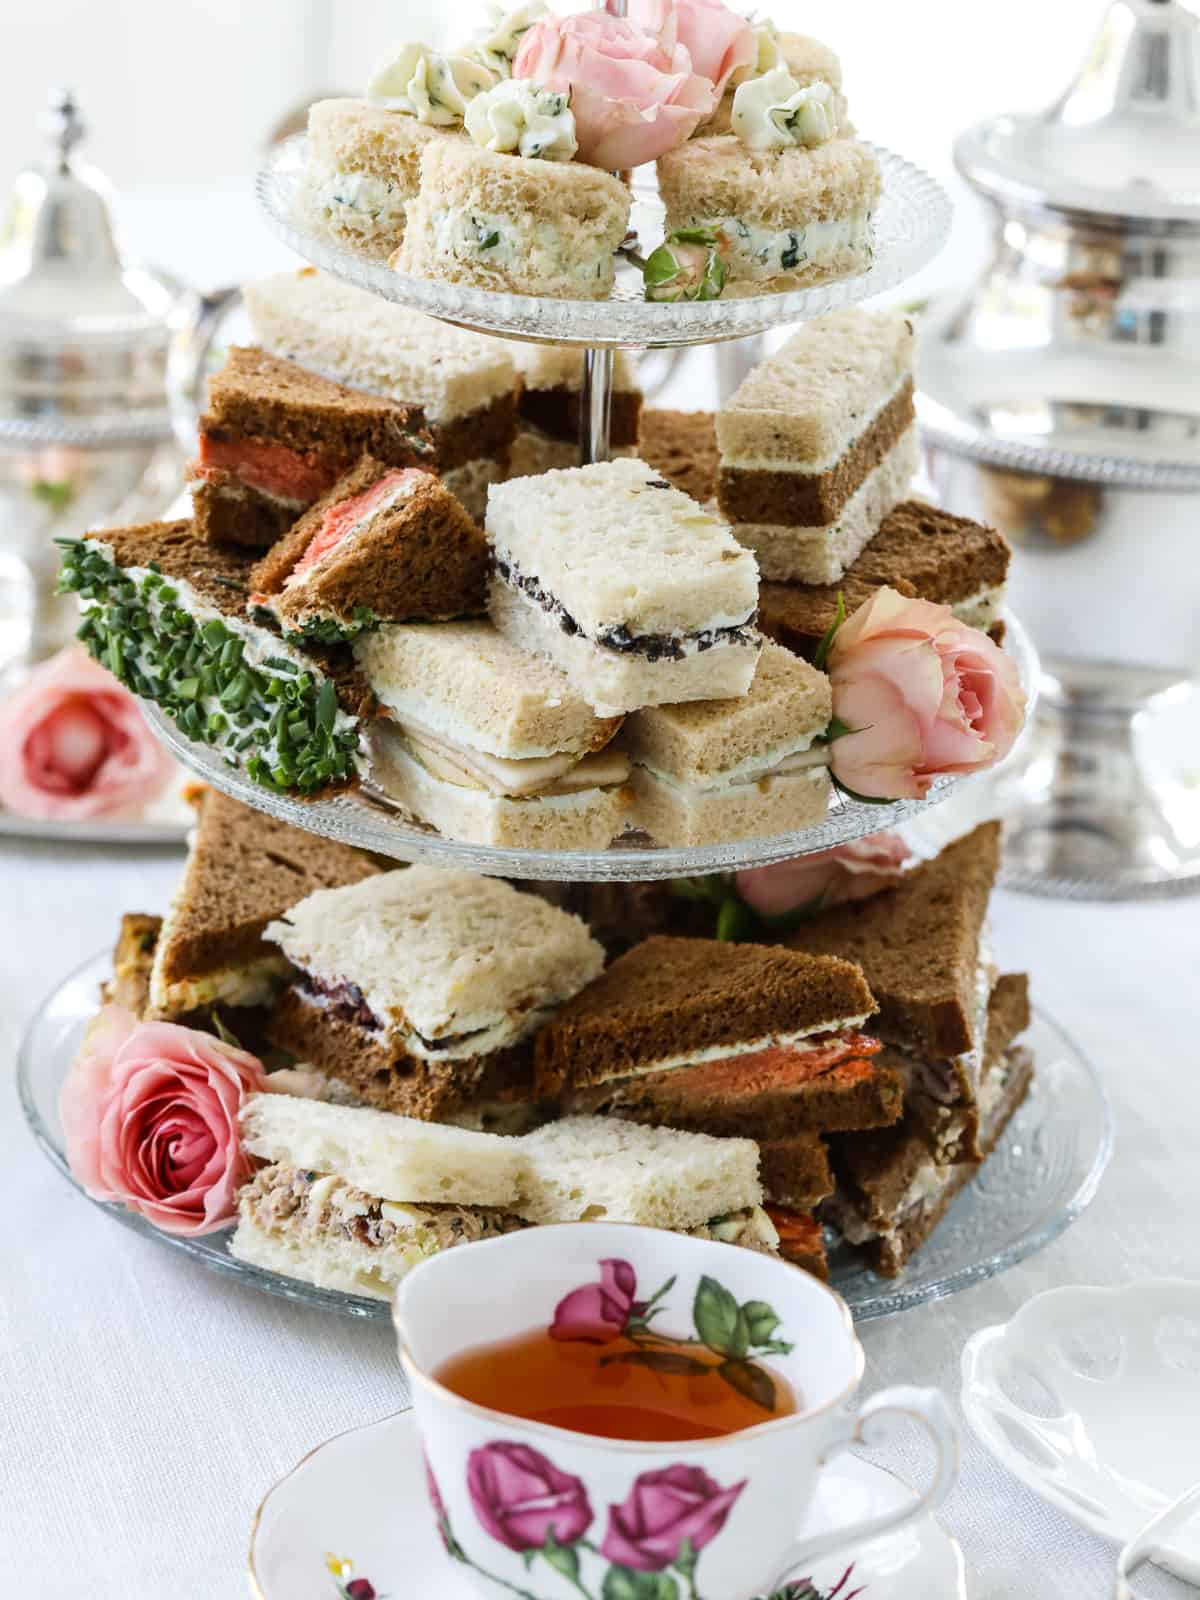 An assortment of different tea sandwiches on a tiered glass tray with different fillings.